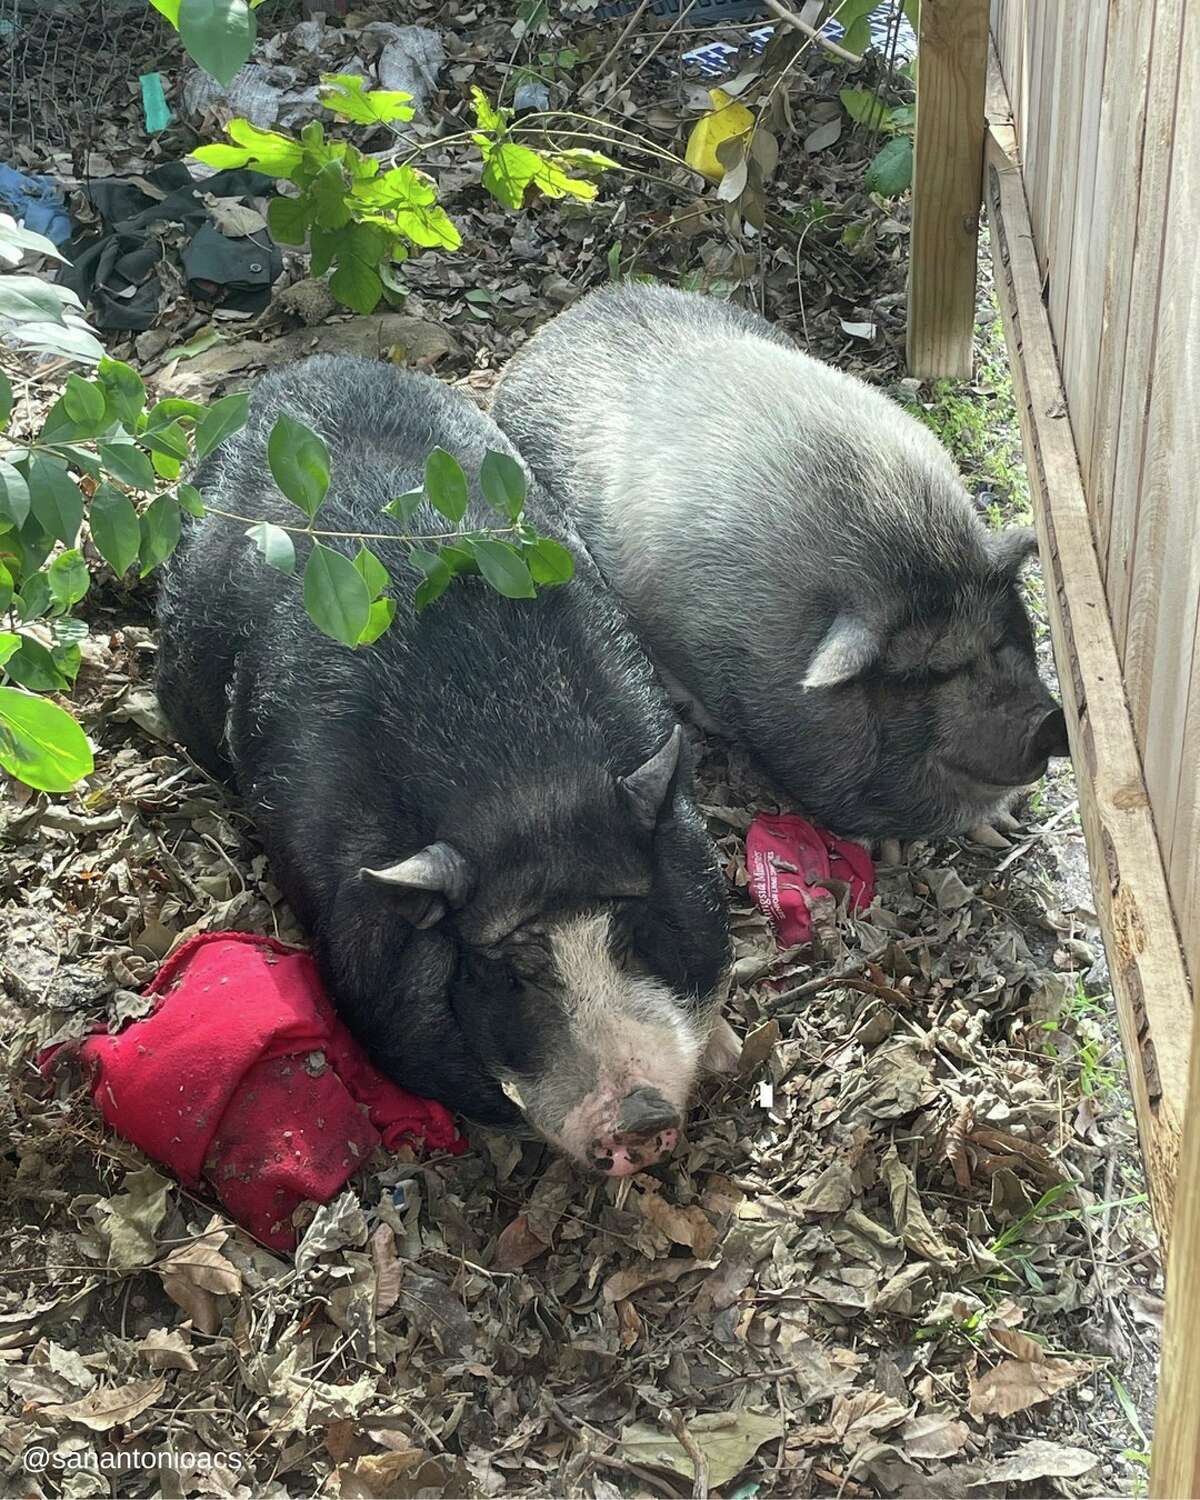 San Antonio's Animal Care Services says it now has six pigs at its location. 